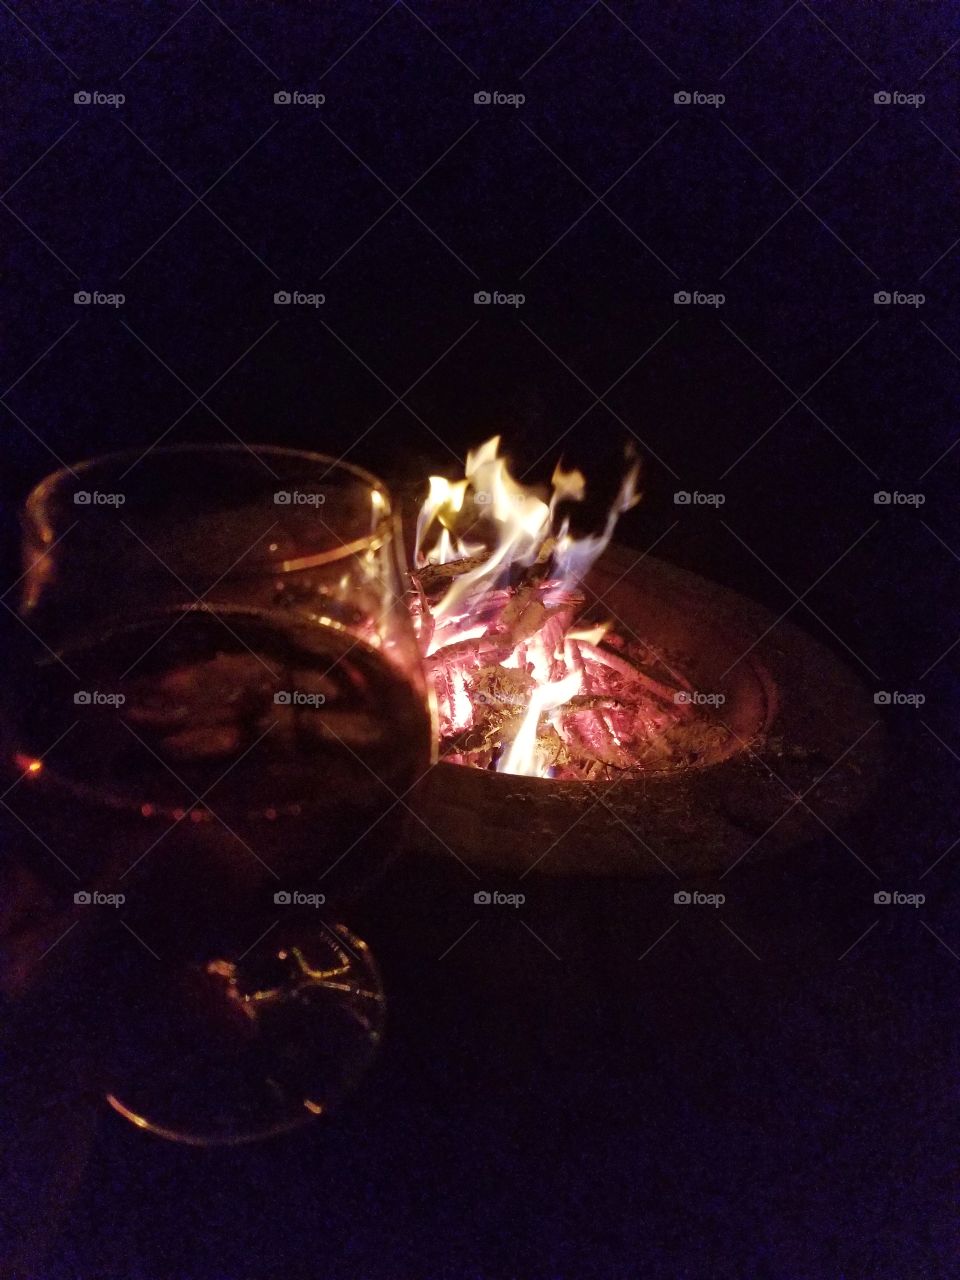 Colorful dancing flames of fire pit nights of the country light, whiskey glass sipping.